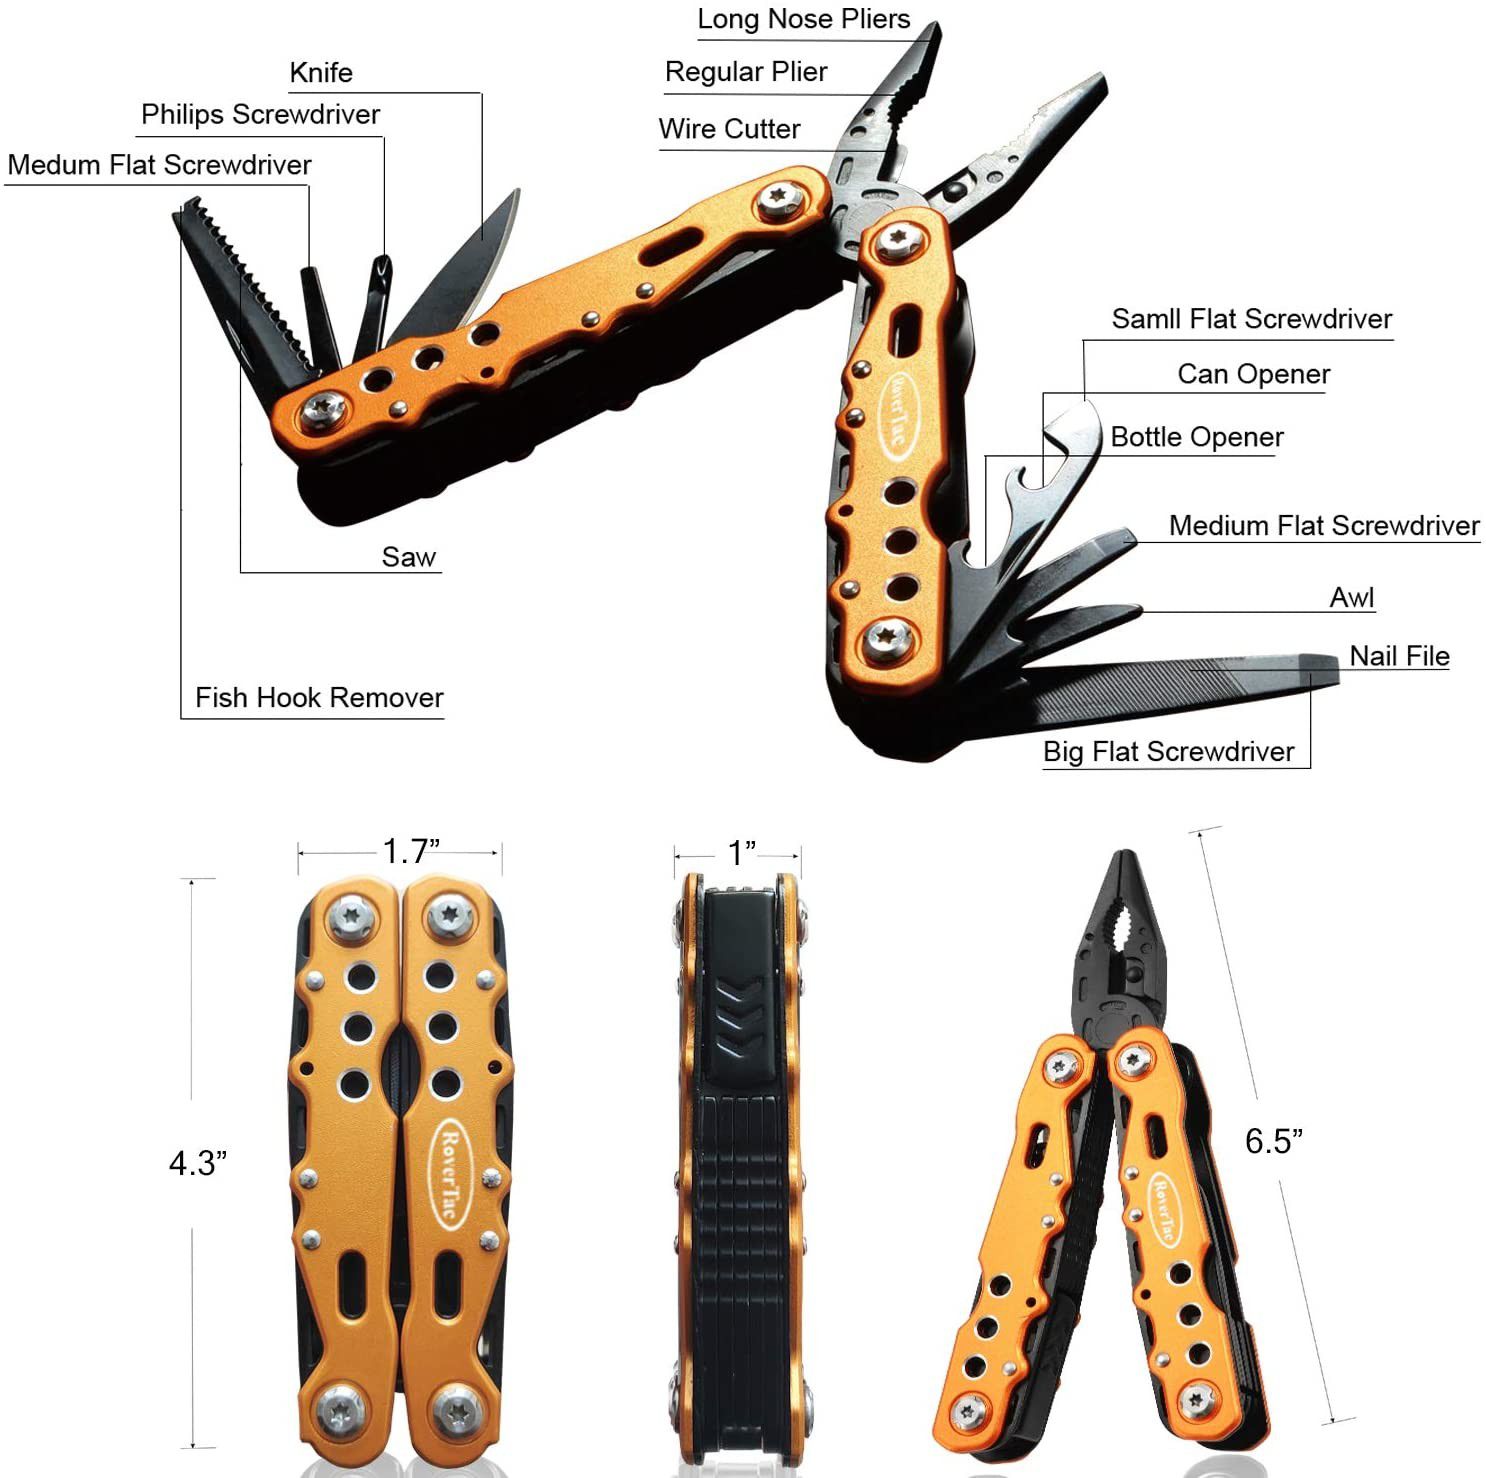 Multitool Pliers Camping Tool Fishing With Safety Lock / Good for Camping, DIY